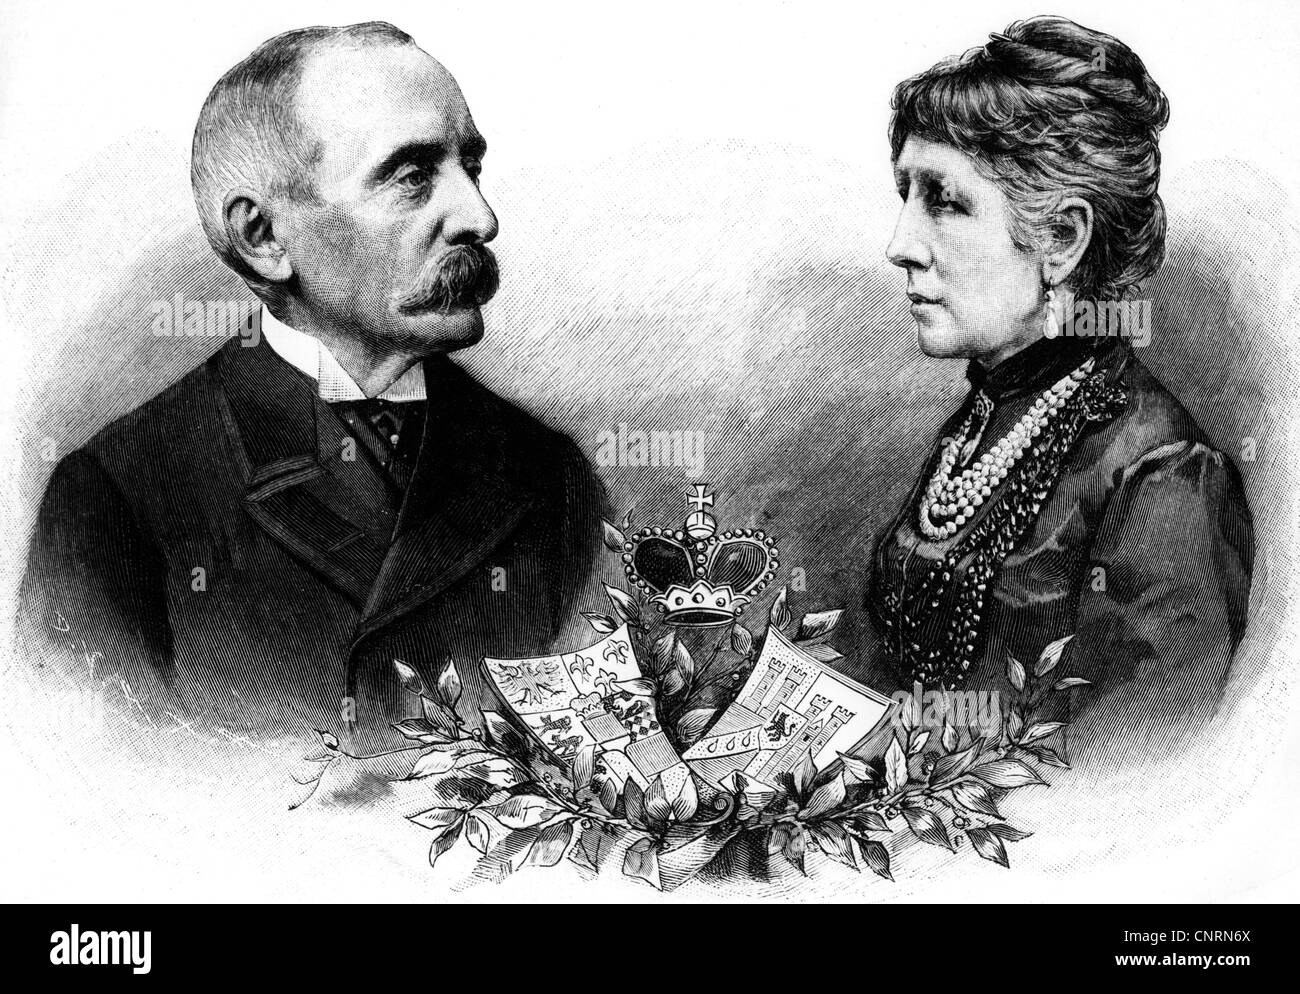 Hohenlohe-Schillingfuerst, Chlodwig Prince of, 31.3.1819 - 6.7.1901, German politician, with wife Marie, wood engraving, 1897, , Stock Photo